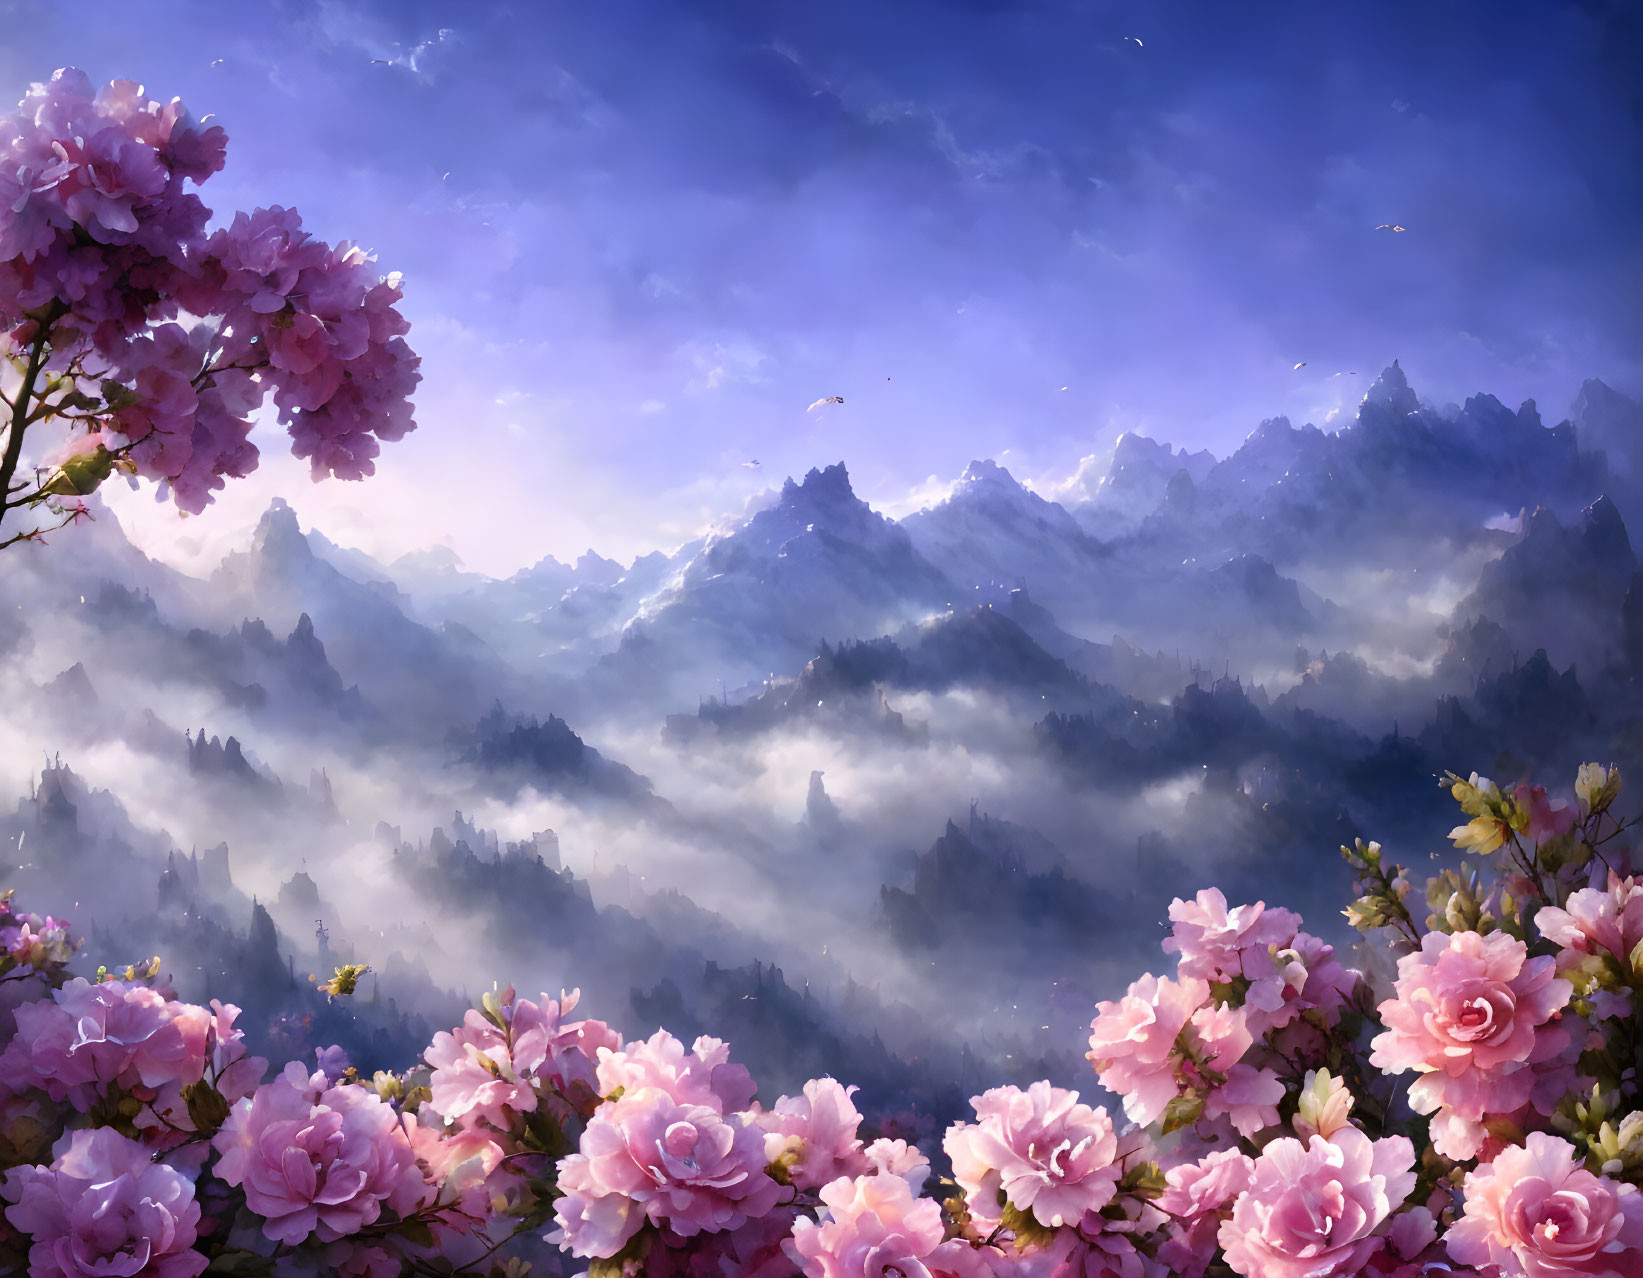 Tranquil landscape with misty mountains and pink blossoms